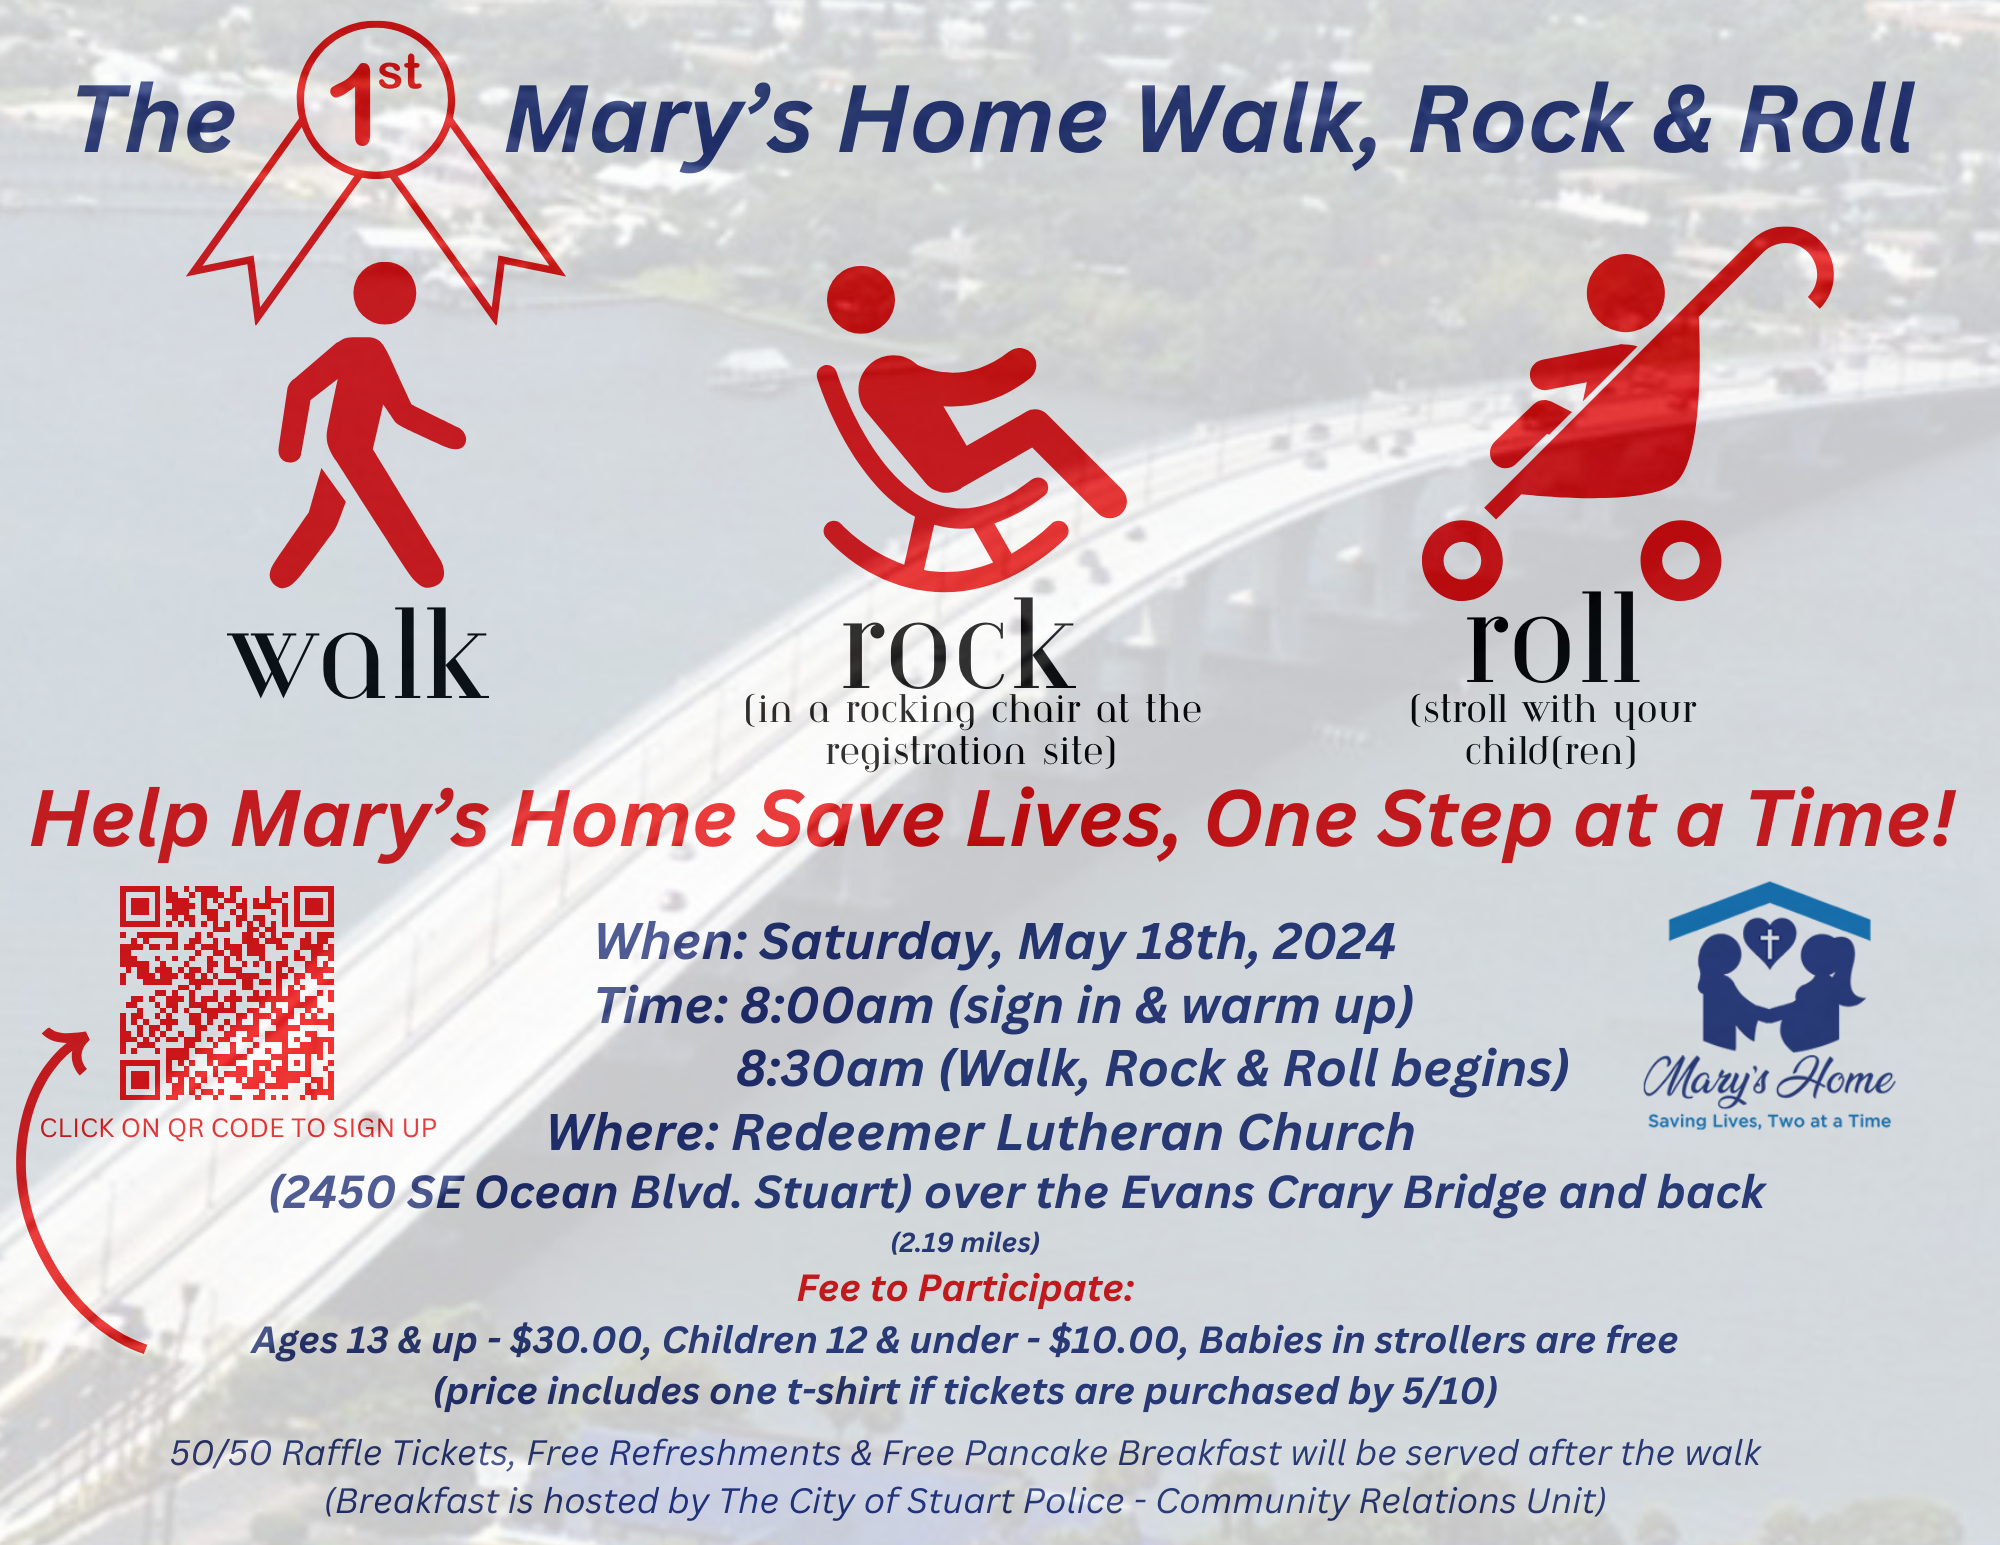 Mary's Home Walk, Rock & Roll